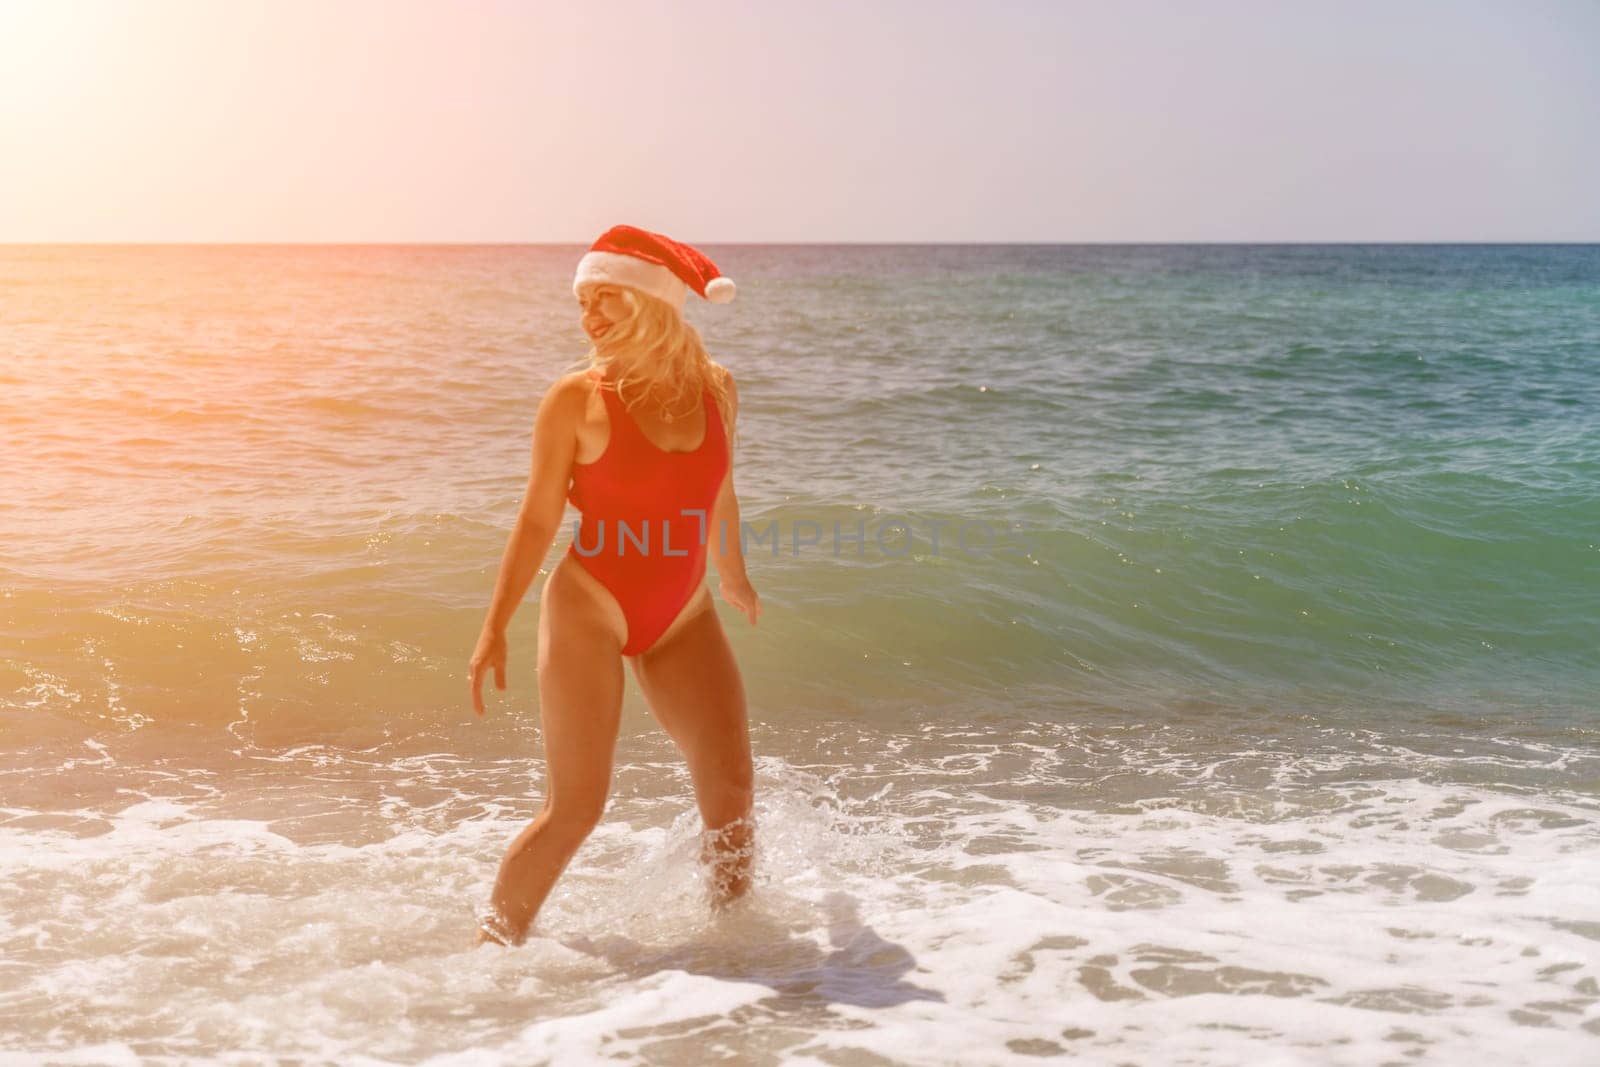 A woman in Santa hat on the seashore, dressed in a red swimsuit. New Year's celebration in a hot country by Matiunina